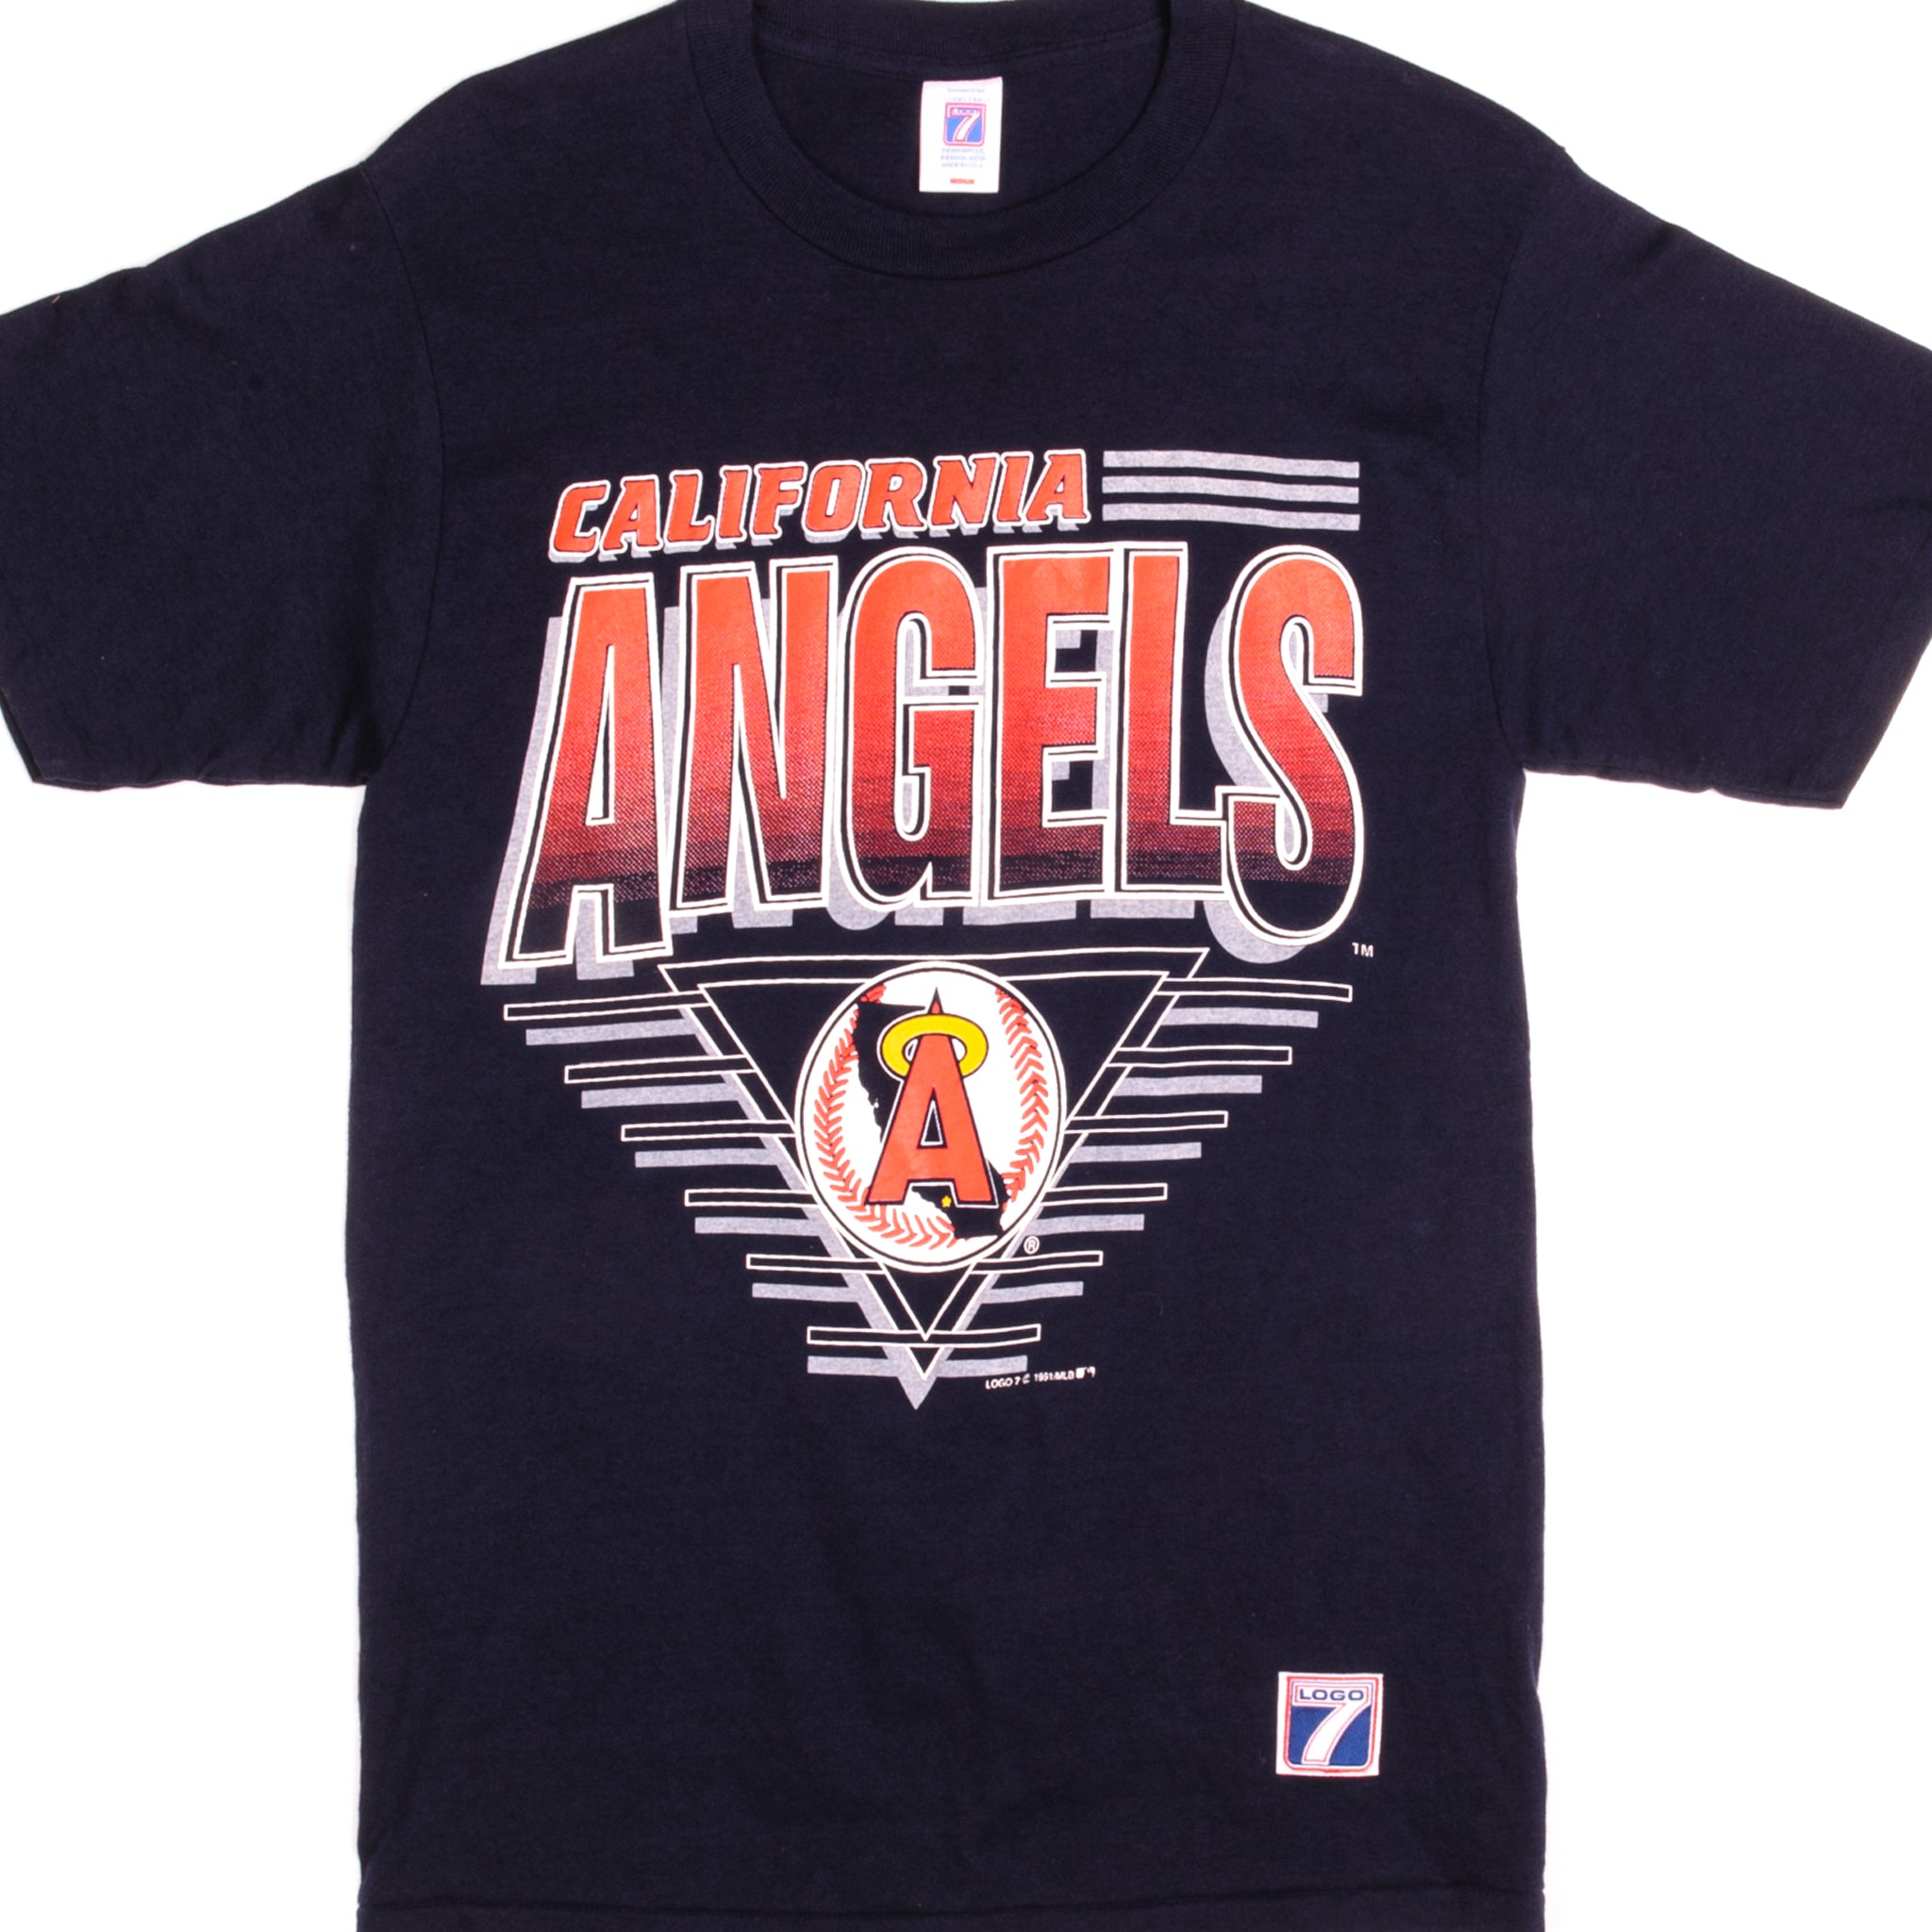 Vintage MLB California Angels Tee Shirt 1991 Size Small Made in USA